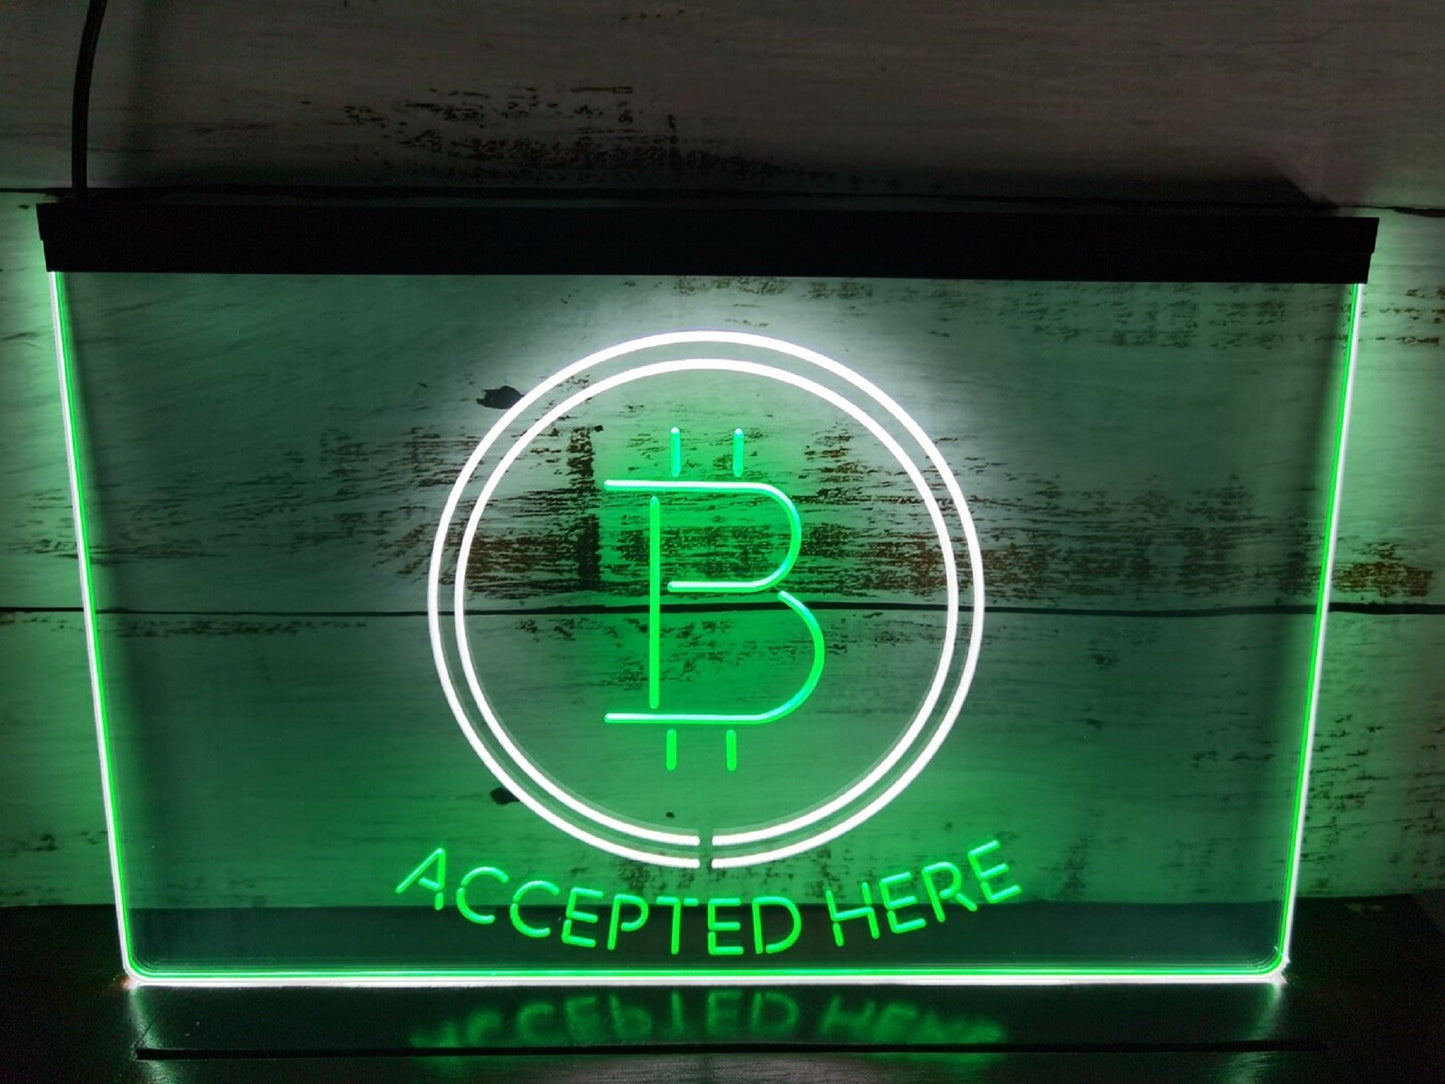 Neon Sign Dual Color Bitcoin Accepted Here Home Wall Desktop Decor Free Shipping